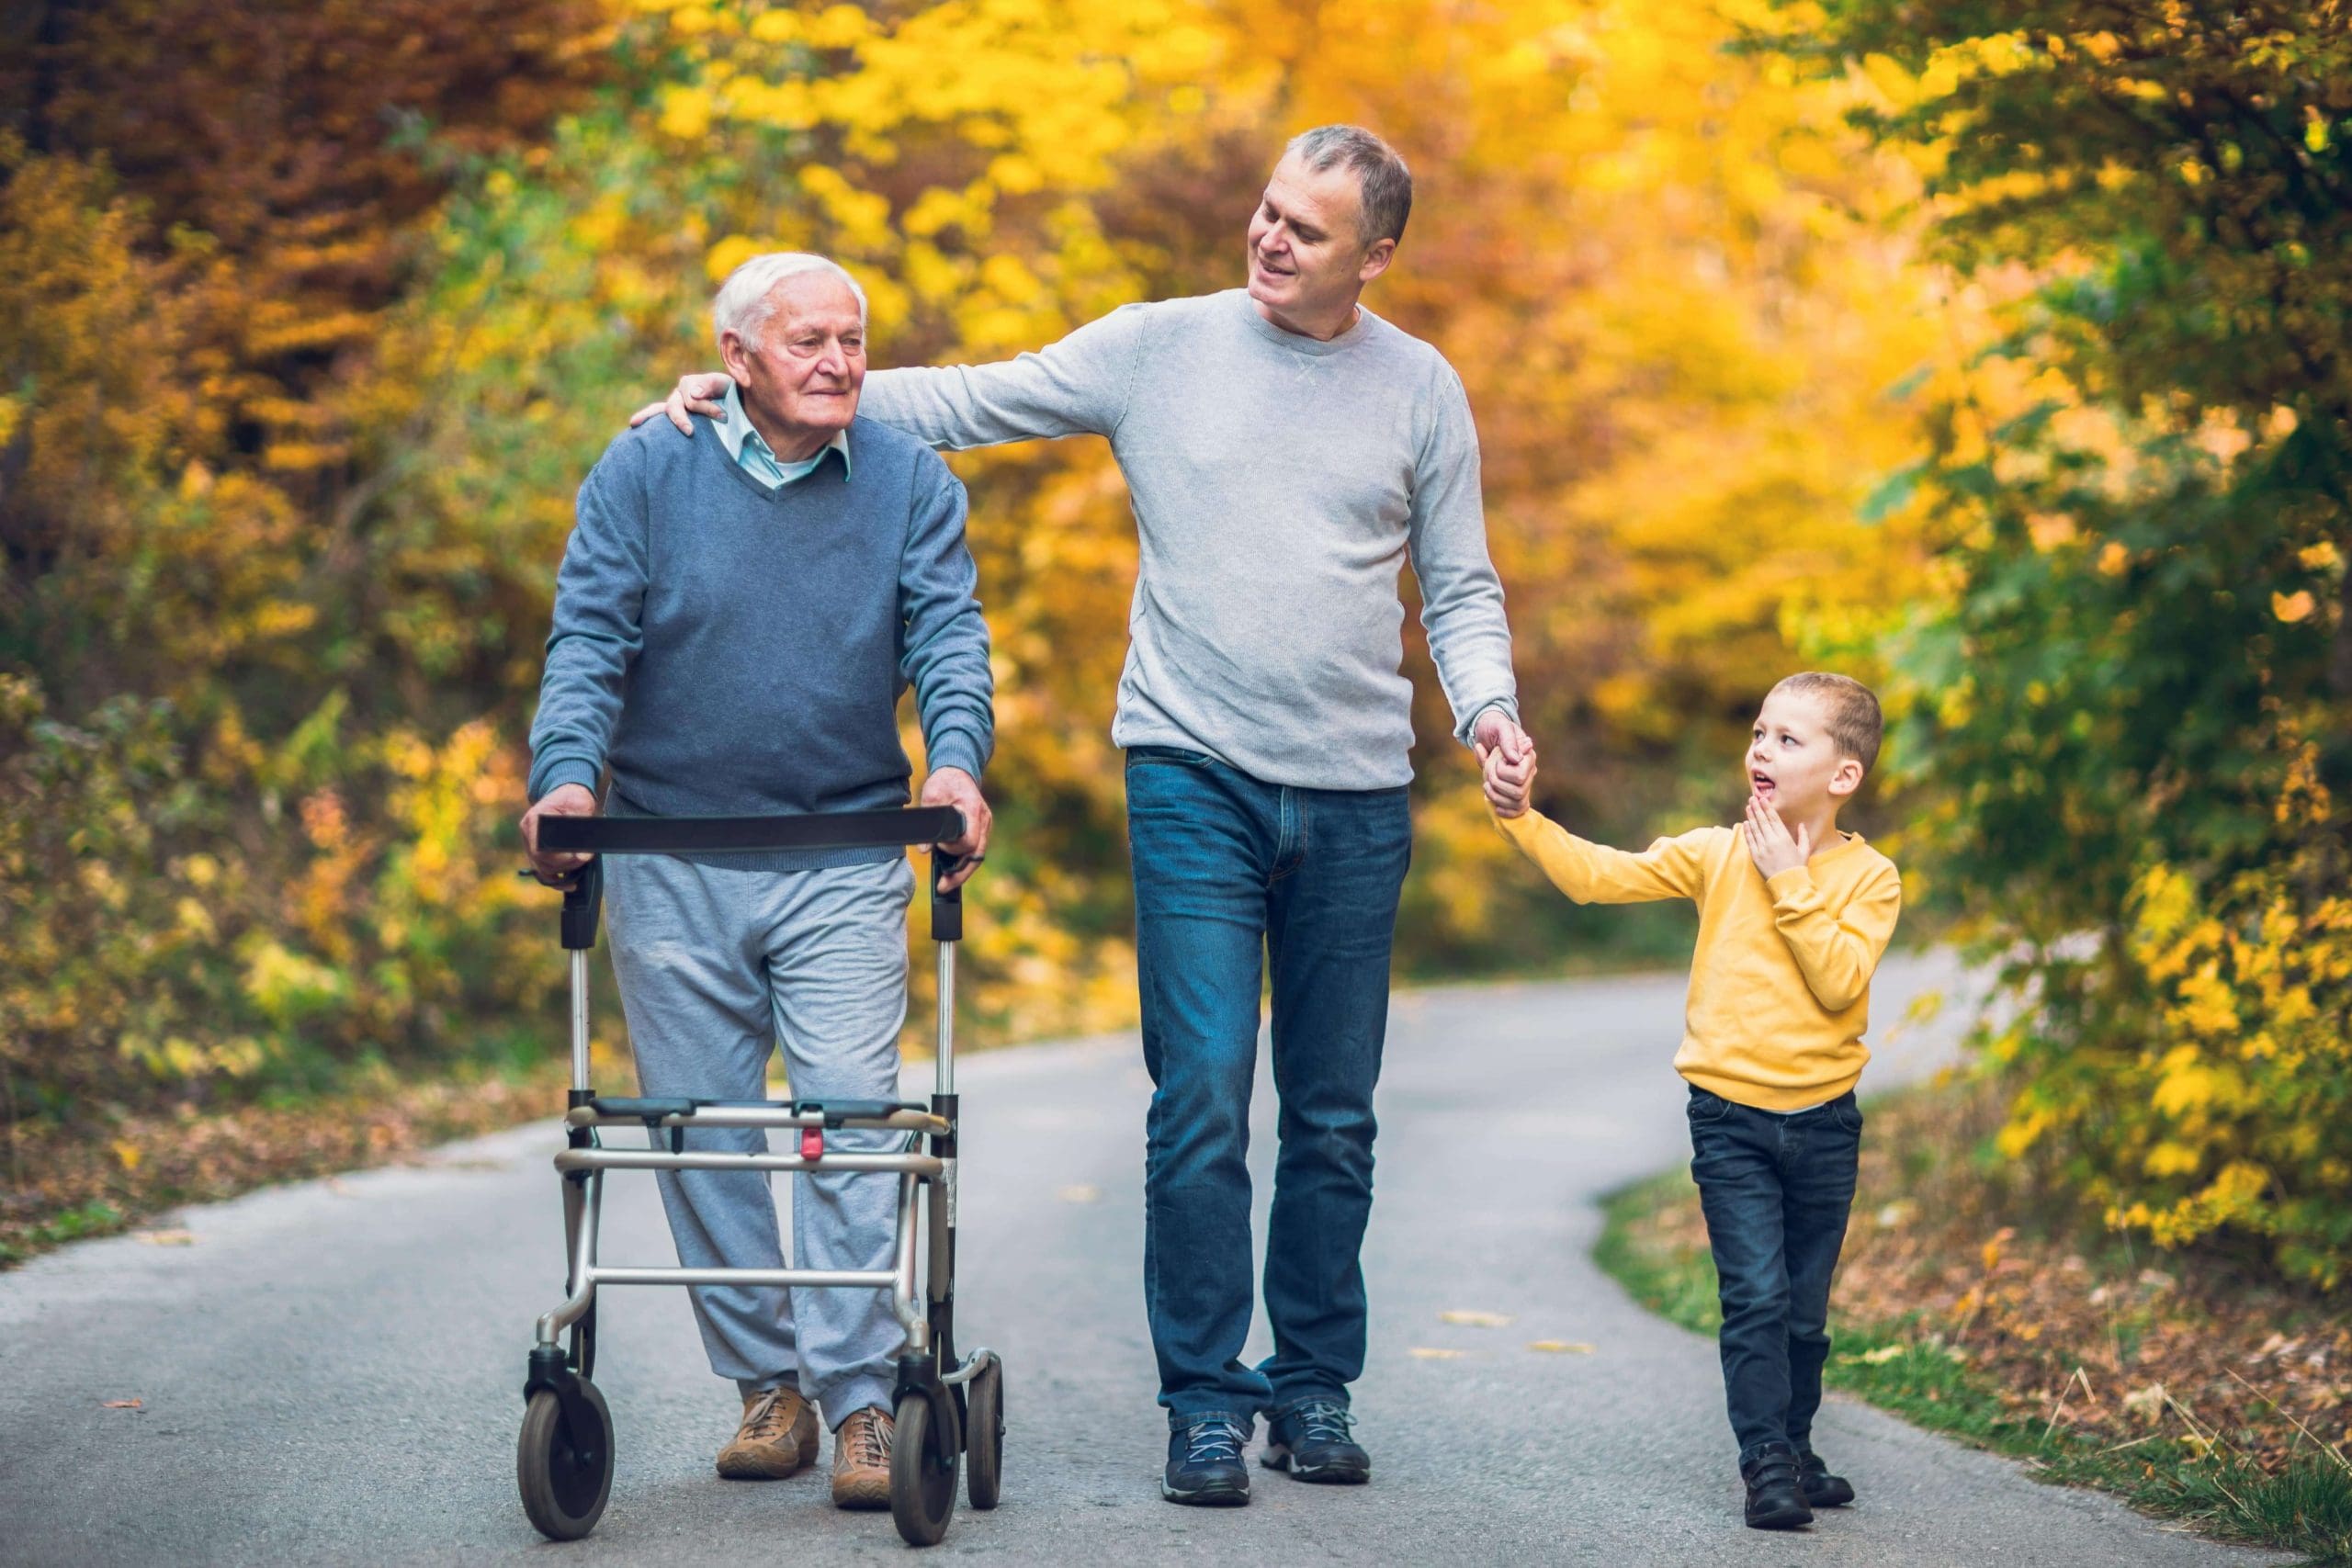 Elderly man with son and grandson walking down a street lined with autumn trees